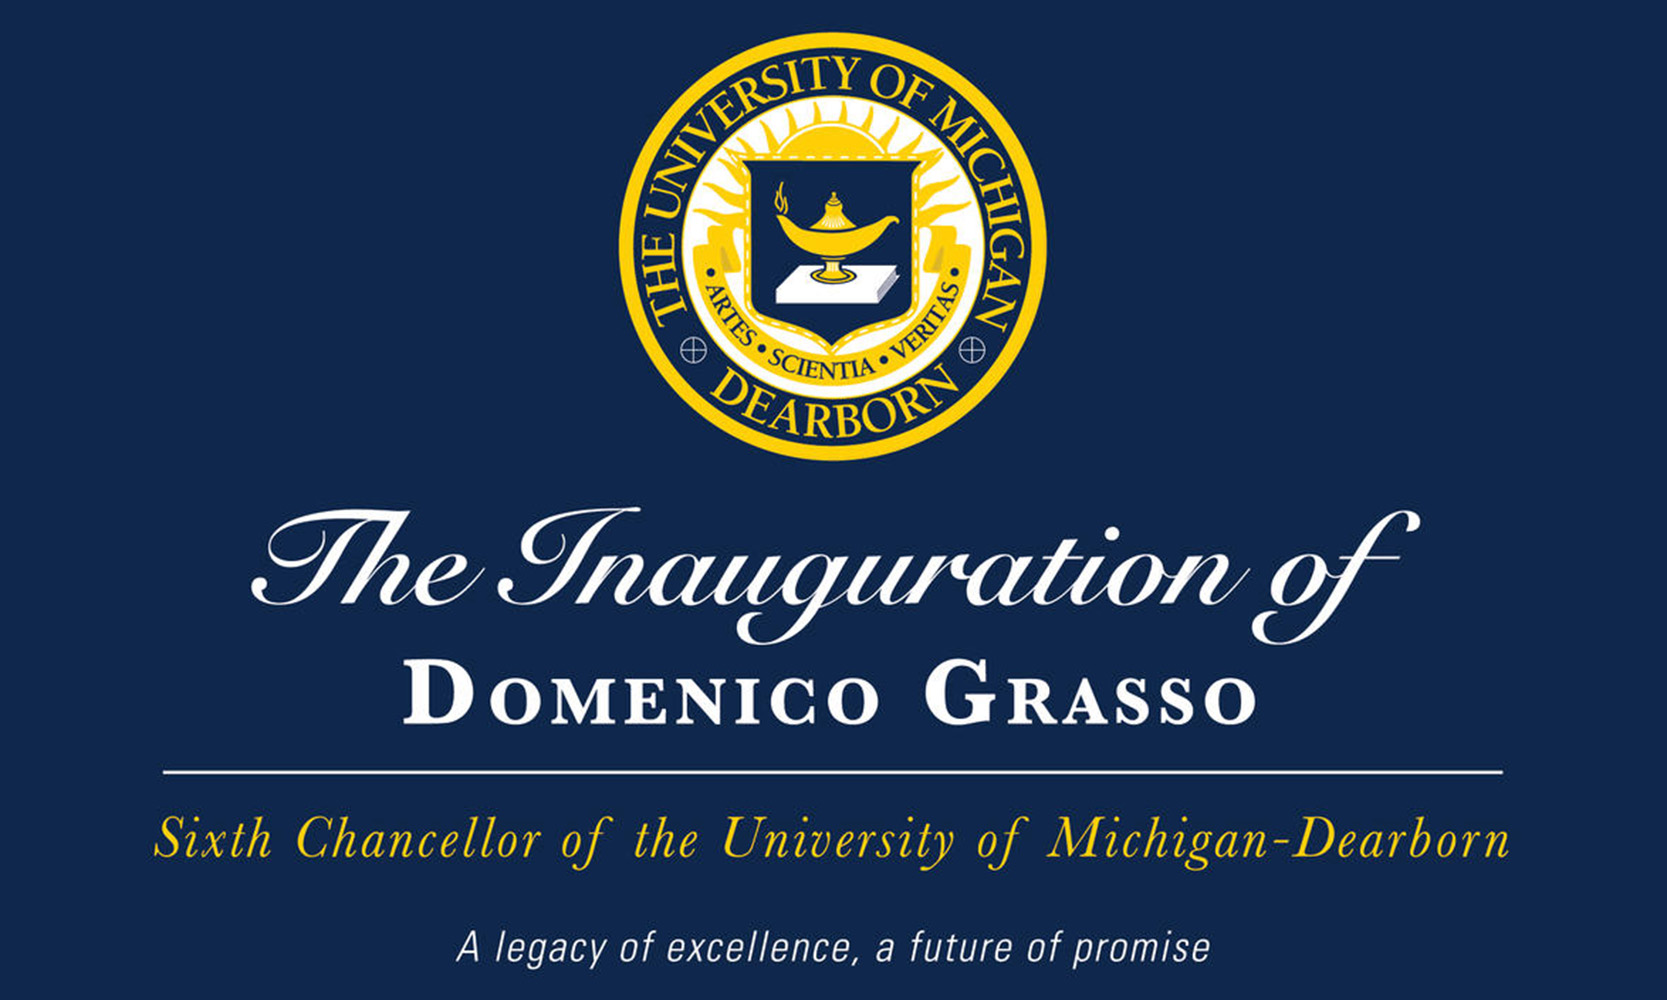 Invitation announcement, The Inauguration of Domenico Grasso. Sixth Chancellor of the University of Michigan-Dearborn. A legacy of excellence, a future of promise